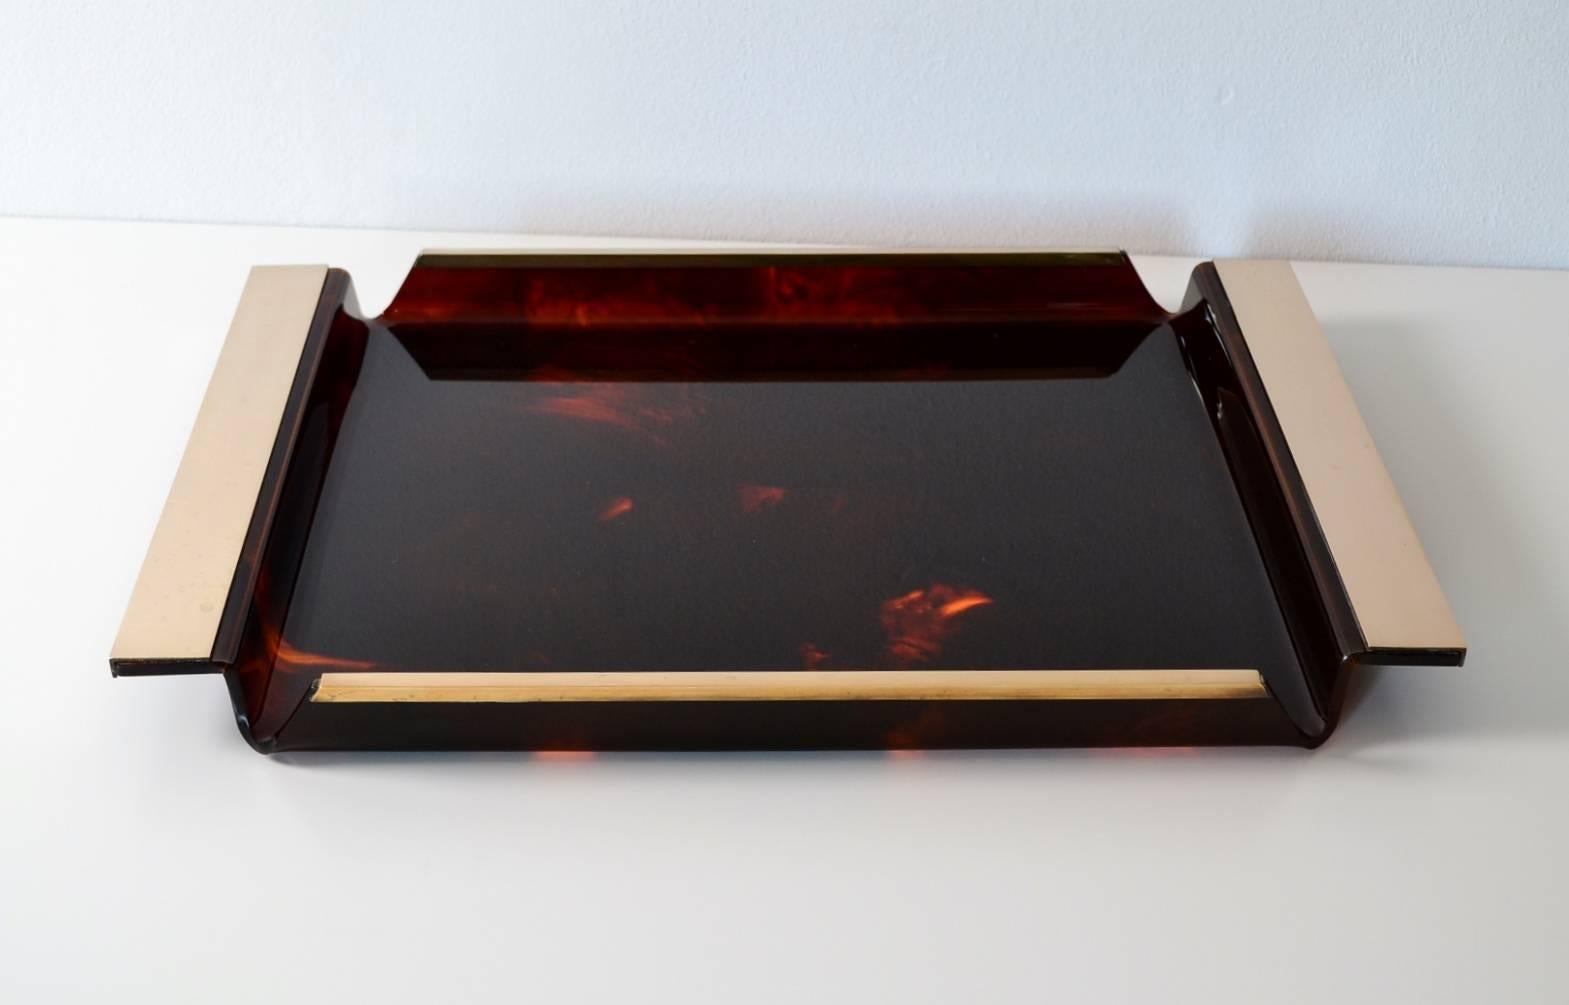 Beautiful large rectangular shape serving tray with Lucite in faux tortoiseshell pattern and shiny brass borders.
Stunning piece fitting with the 